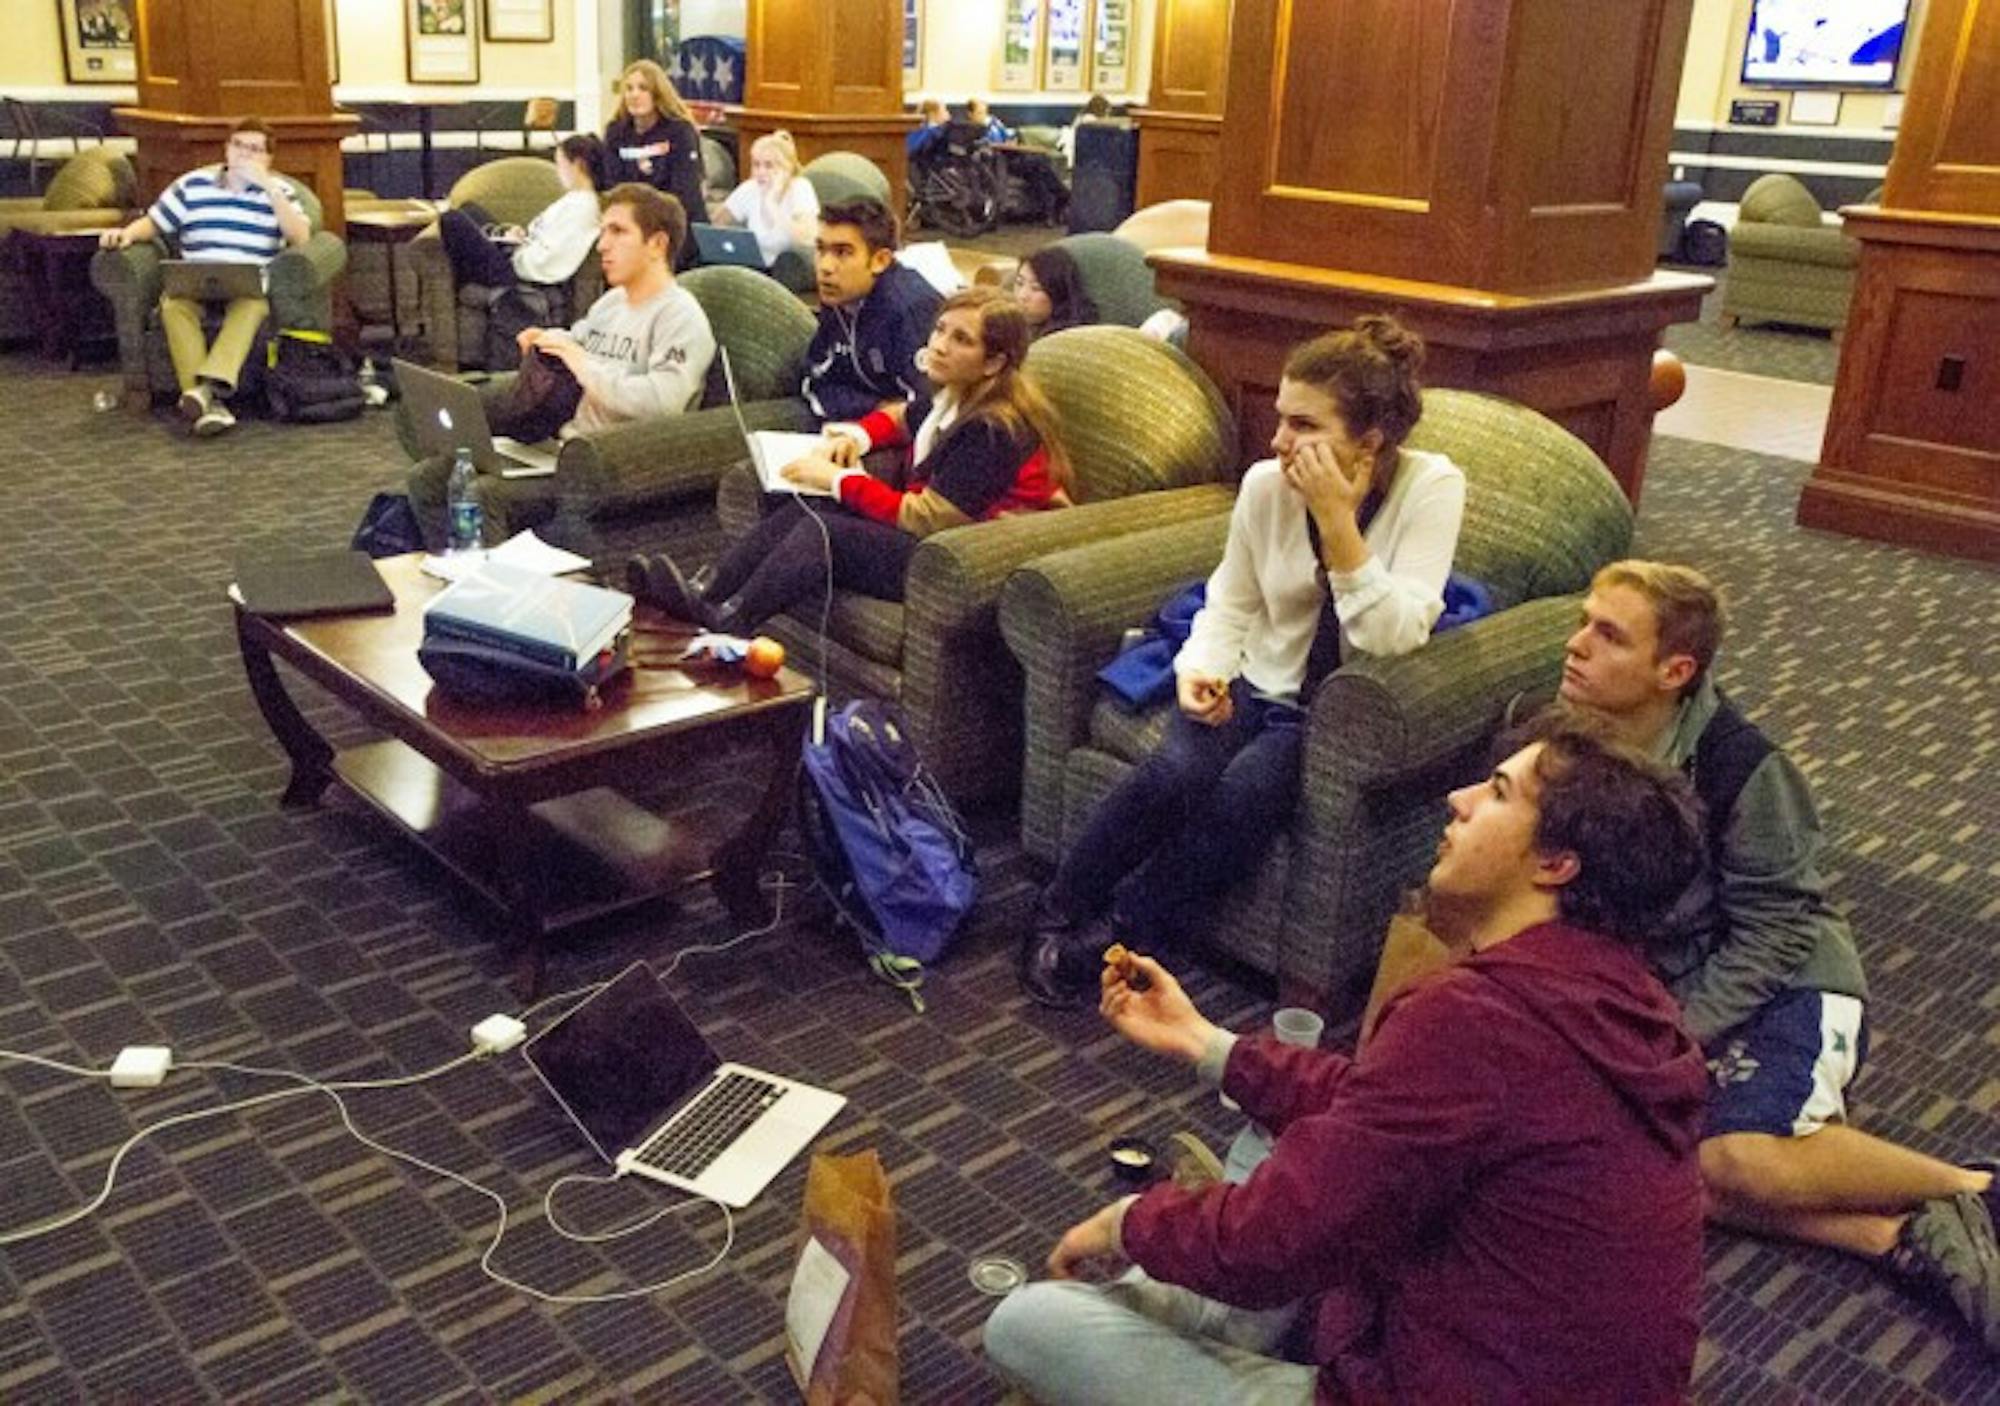 Students anxiously watch the election results on the TV in the lobby of LaFortune Student Center on Tuesday.